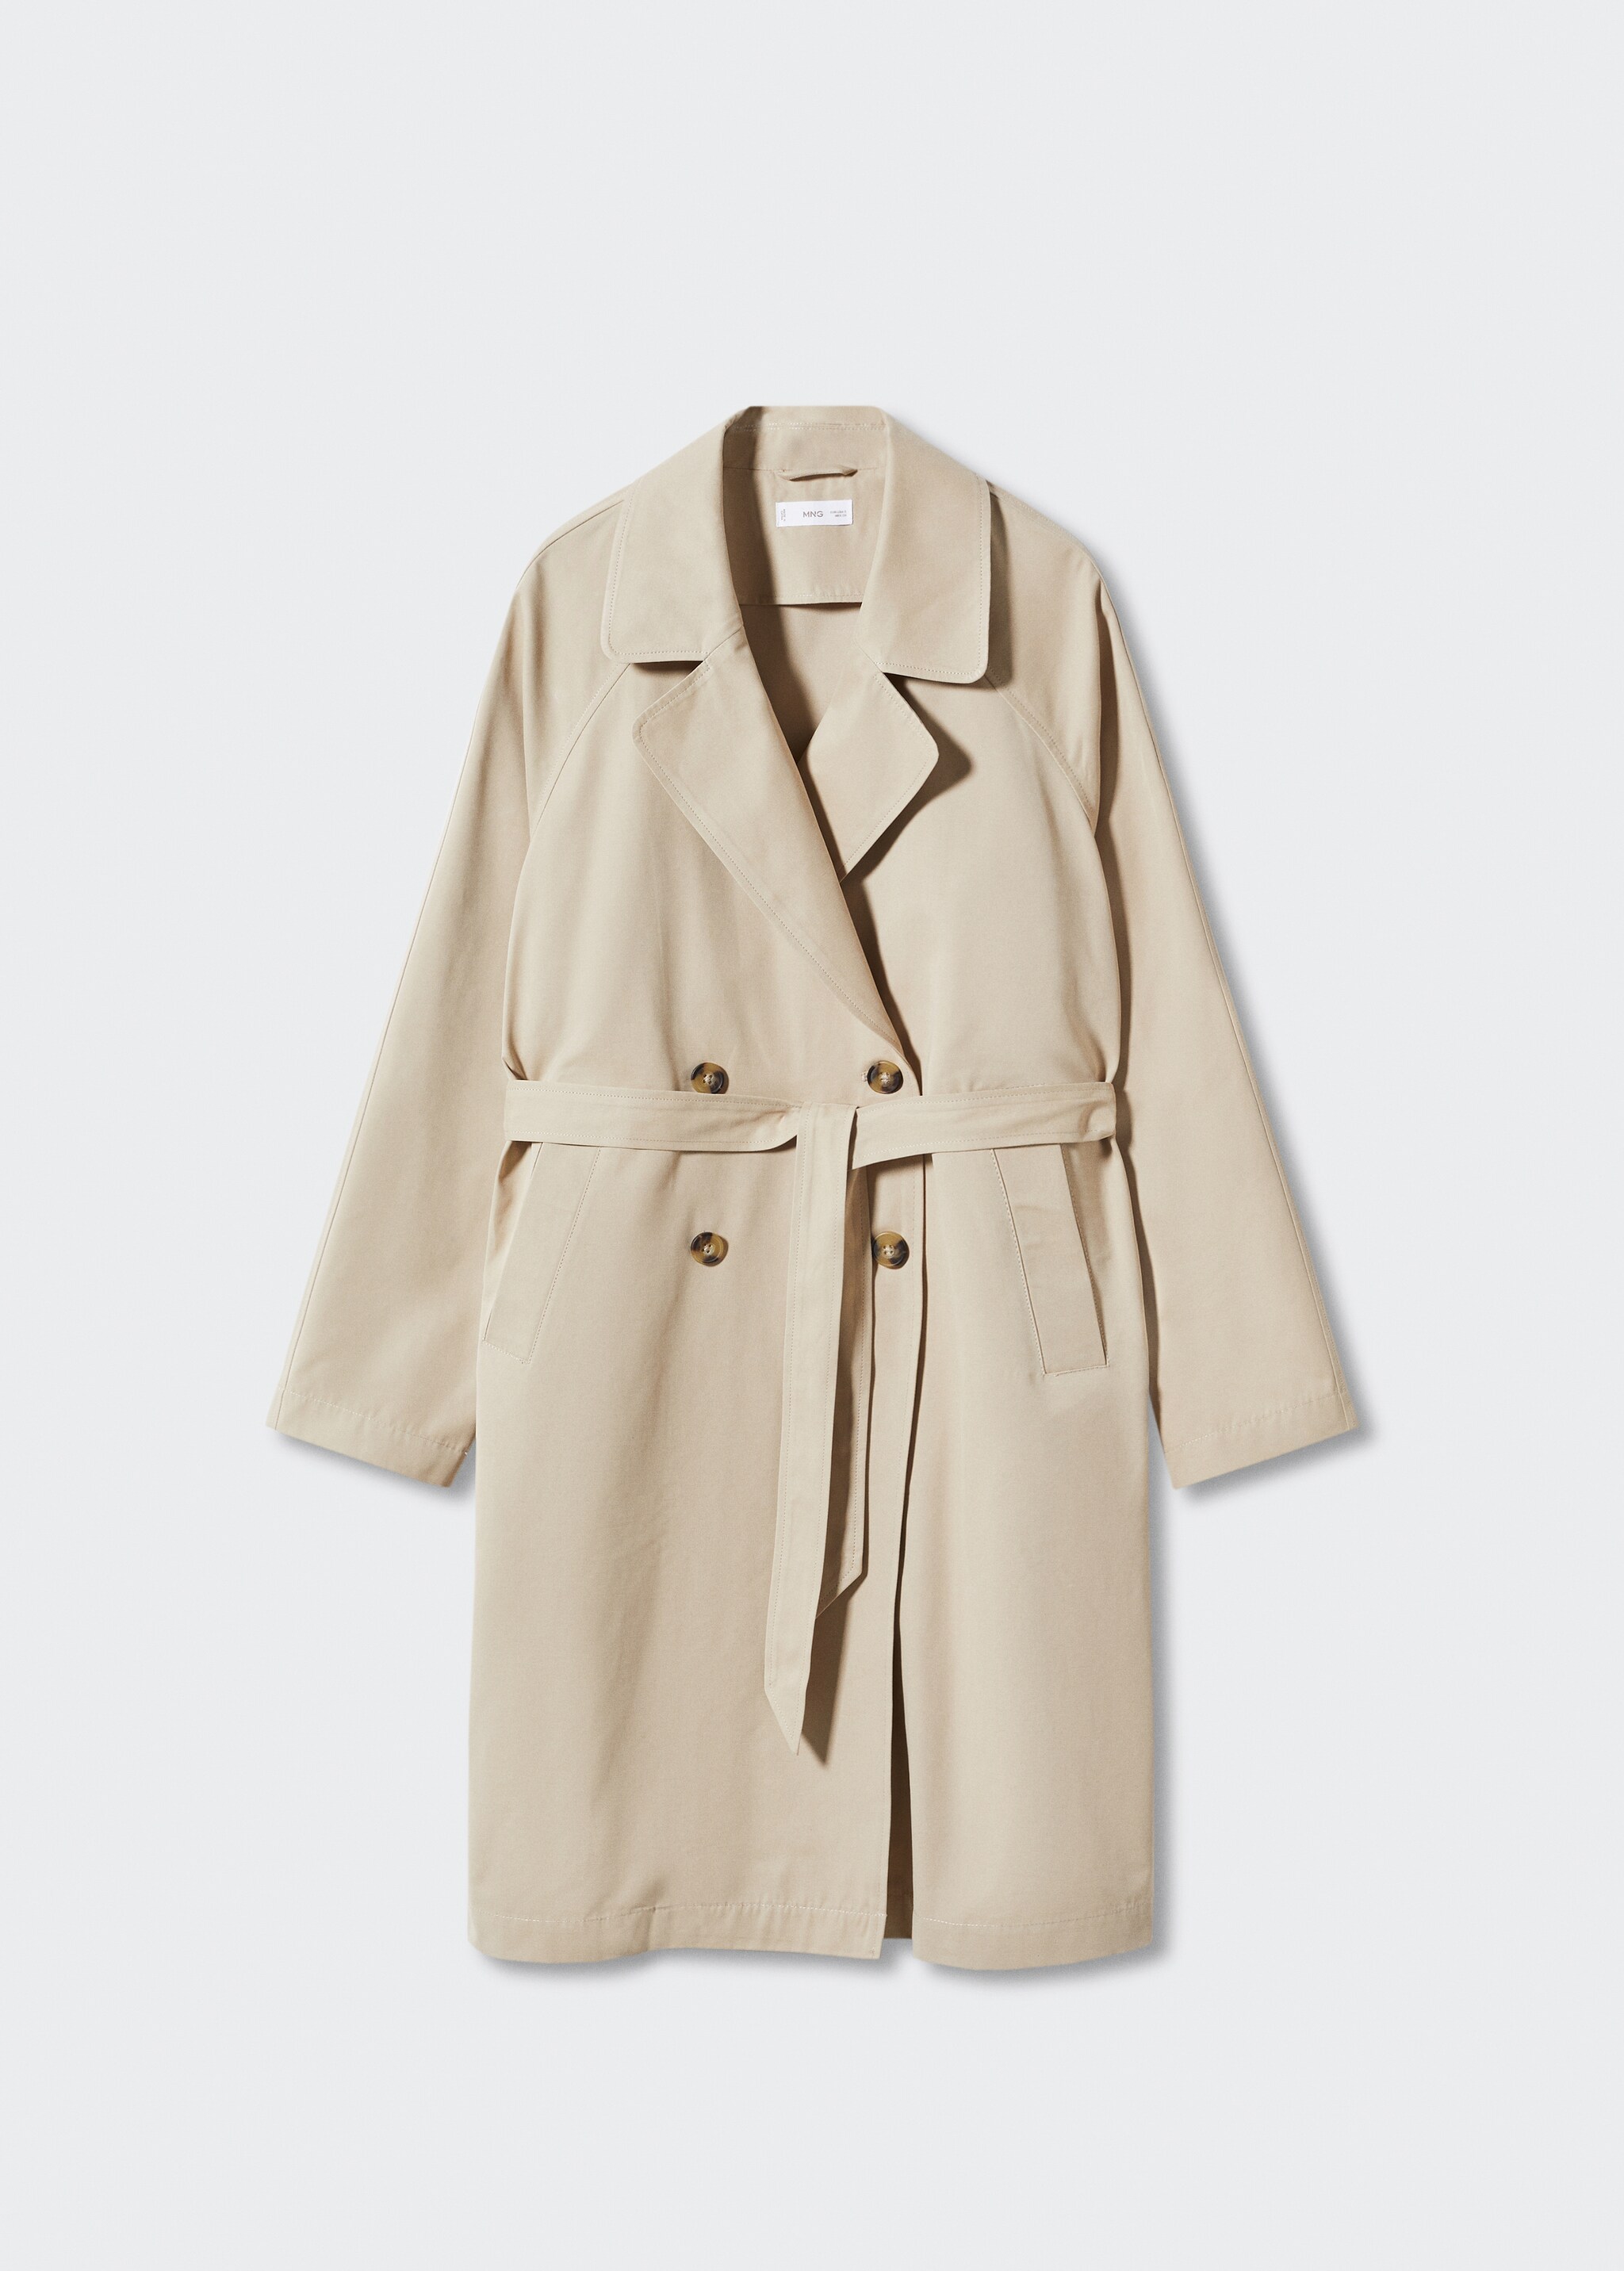 Classic trench coat - Article without model